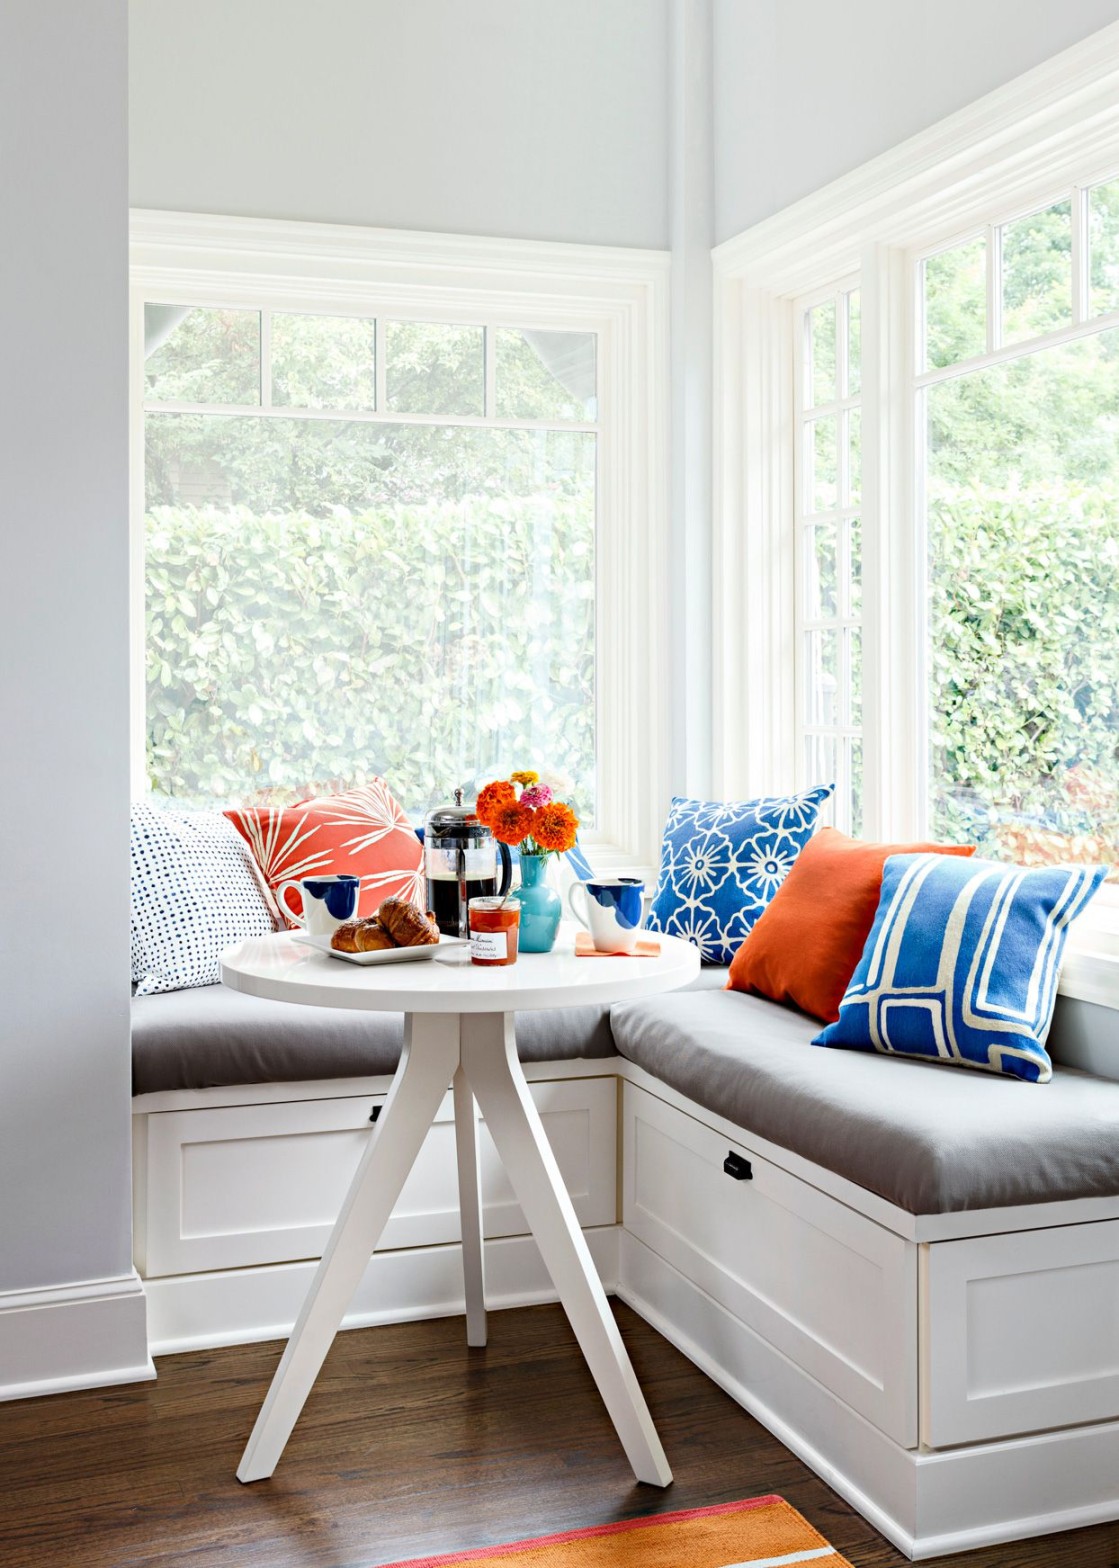 Clever Design Ideas for Banquette Seating with Storage